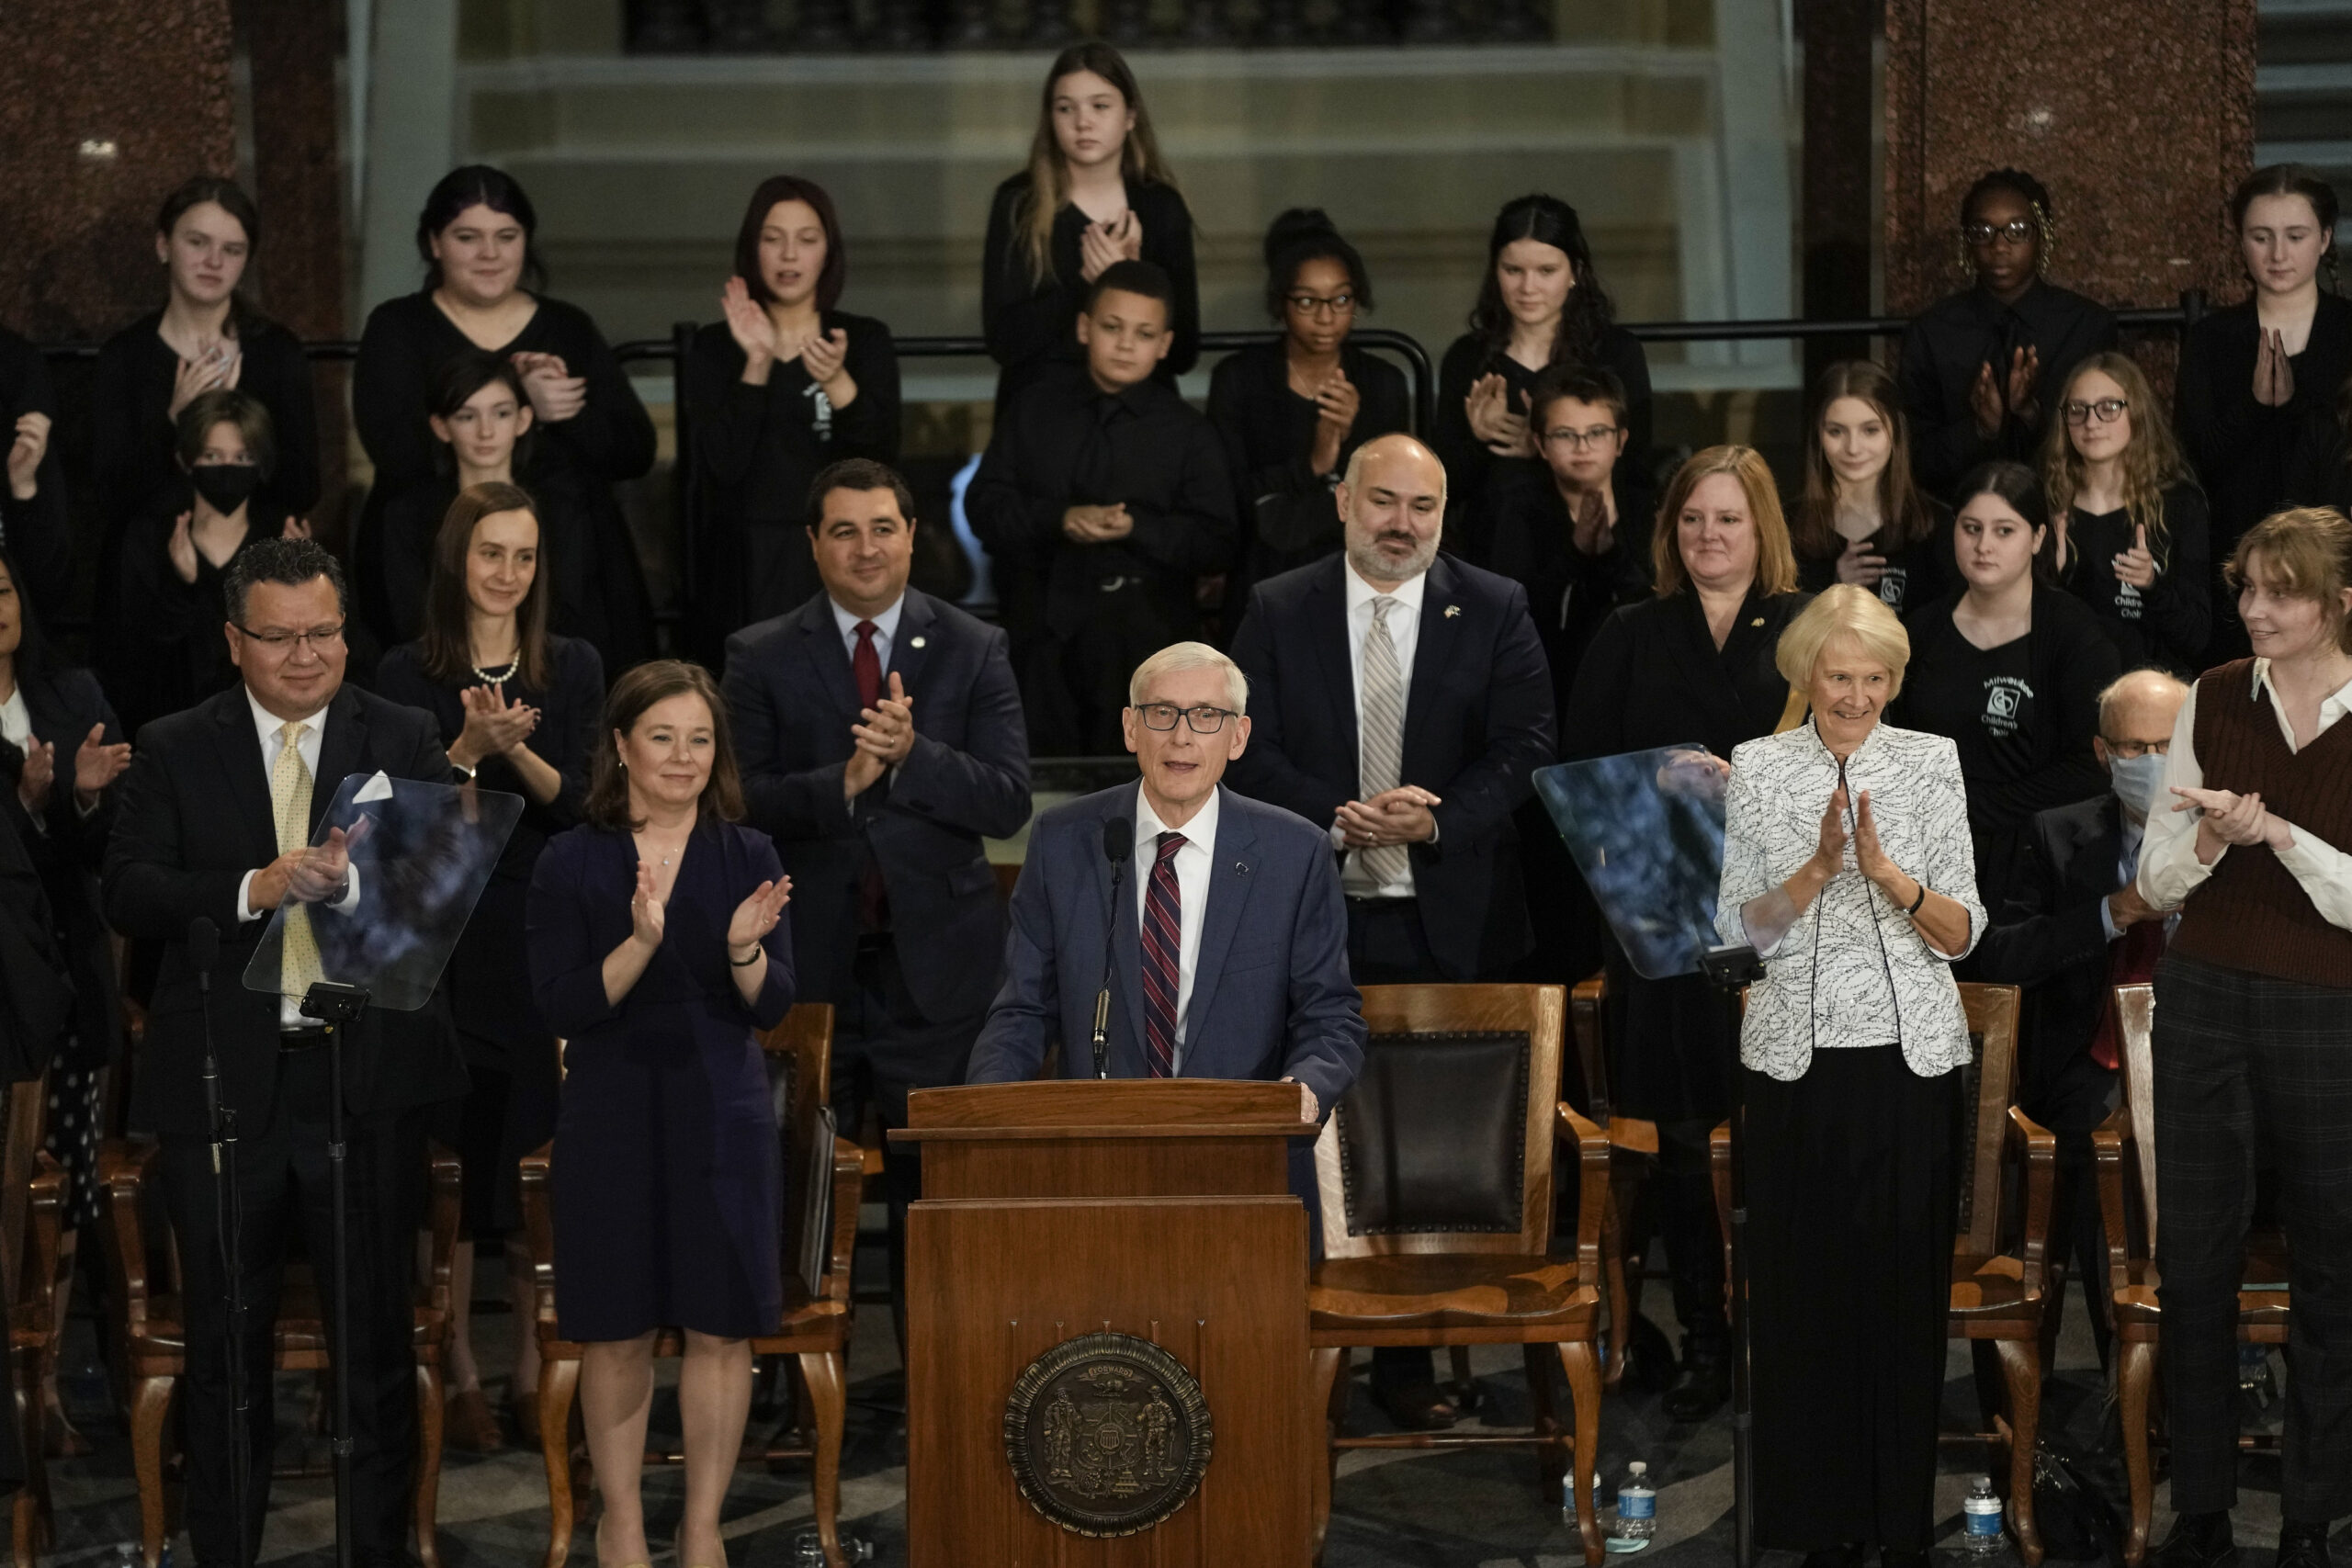 Wisconsin Gov. Tony Evers speaks during an inauguration ceremony